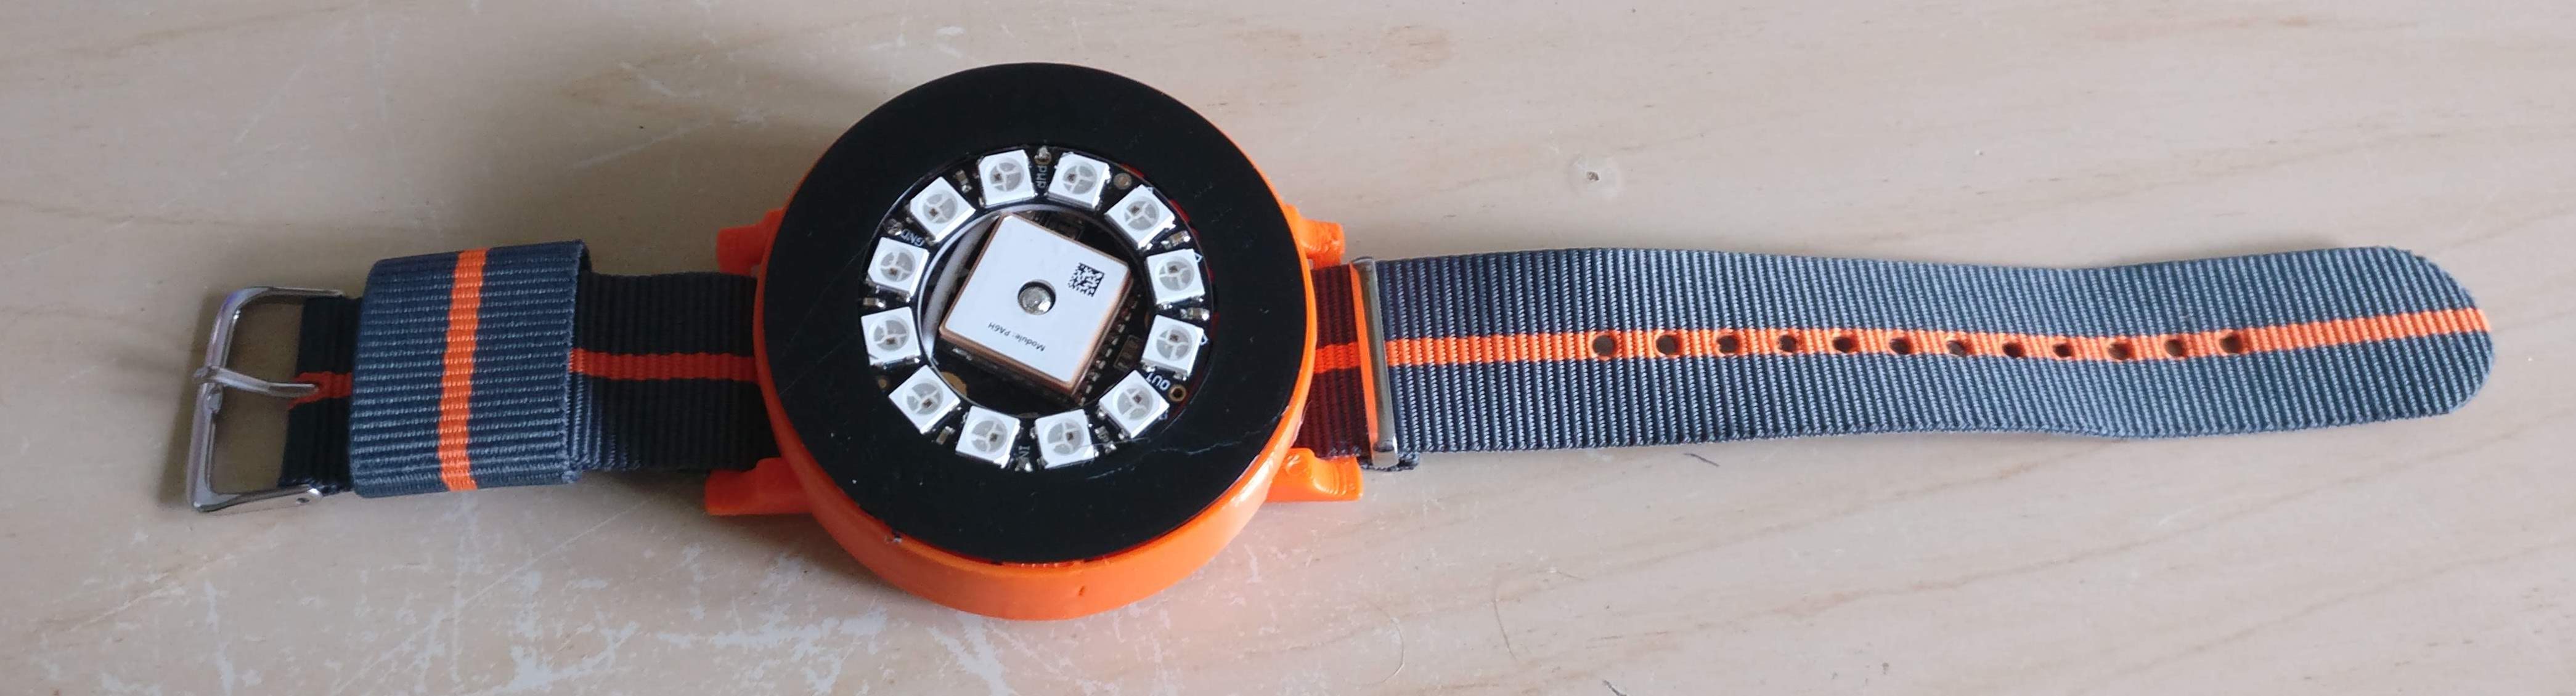 LED Watch in all the Glory